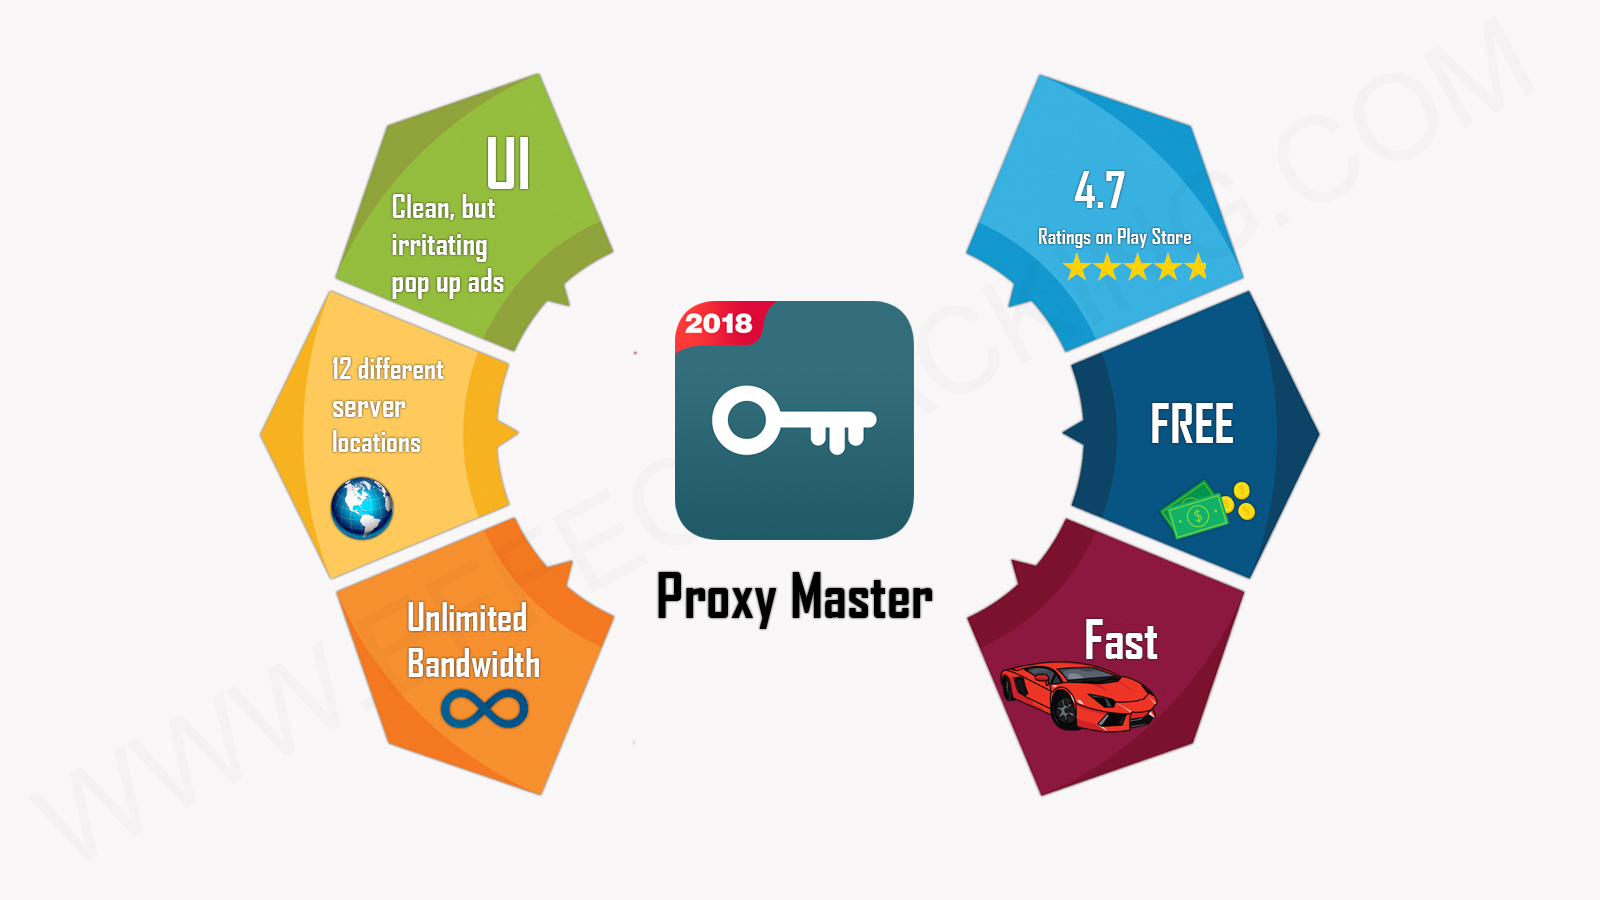 Free VPN Unlimited Proxy - Proxy Master Infographic